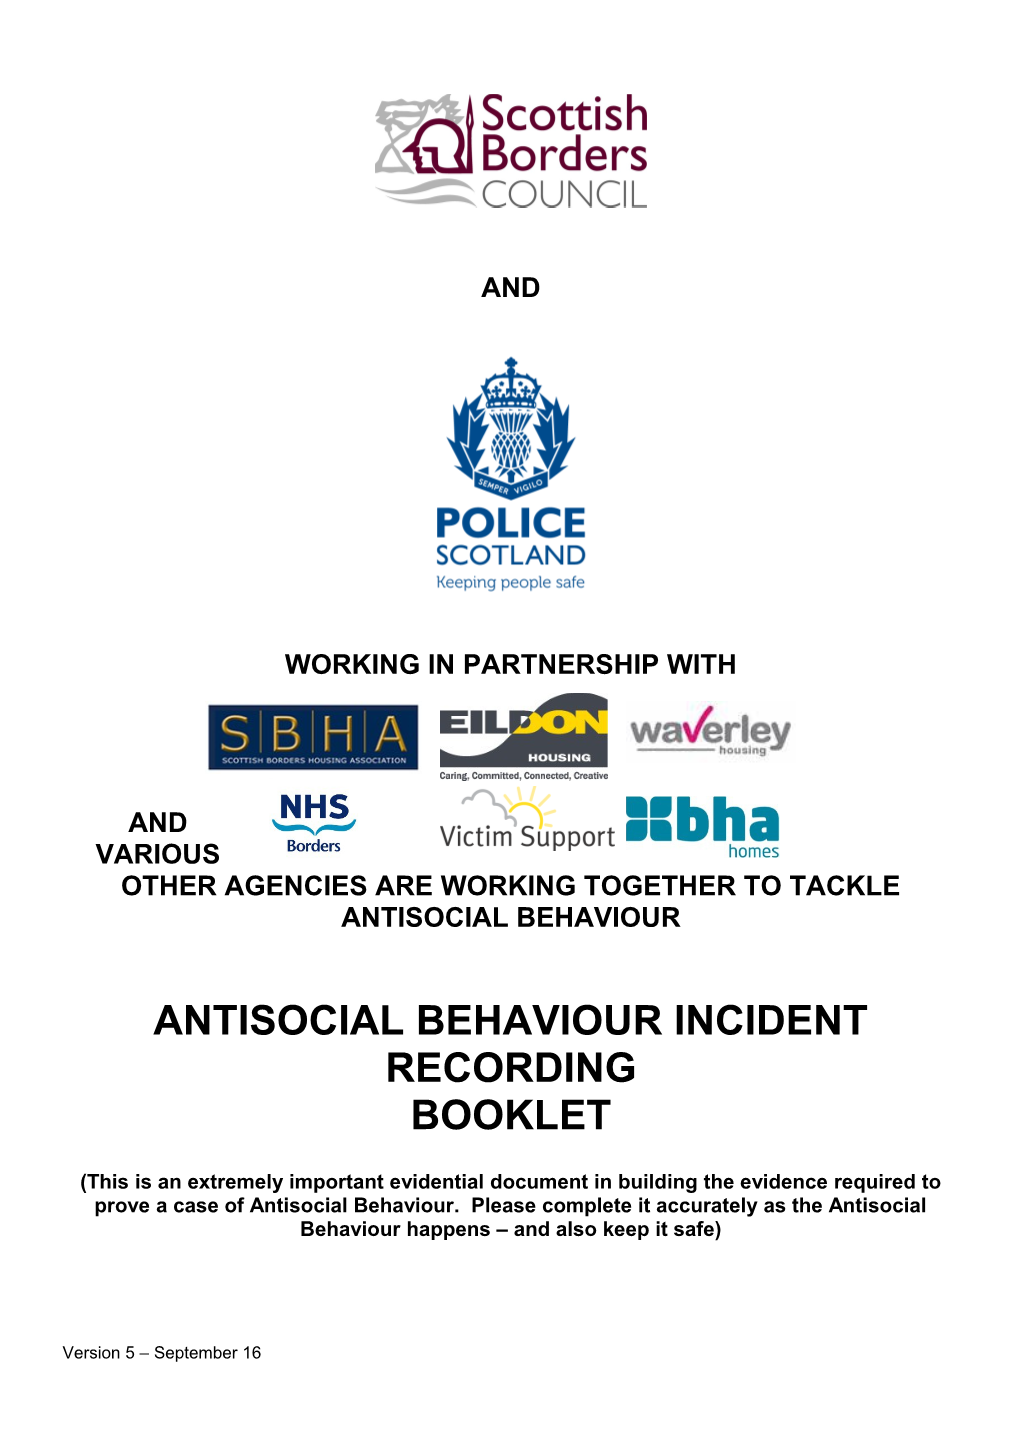 And Various Other Agencies Are Working Together to Tackle Antisocial Behaviour